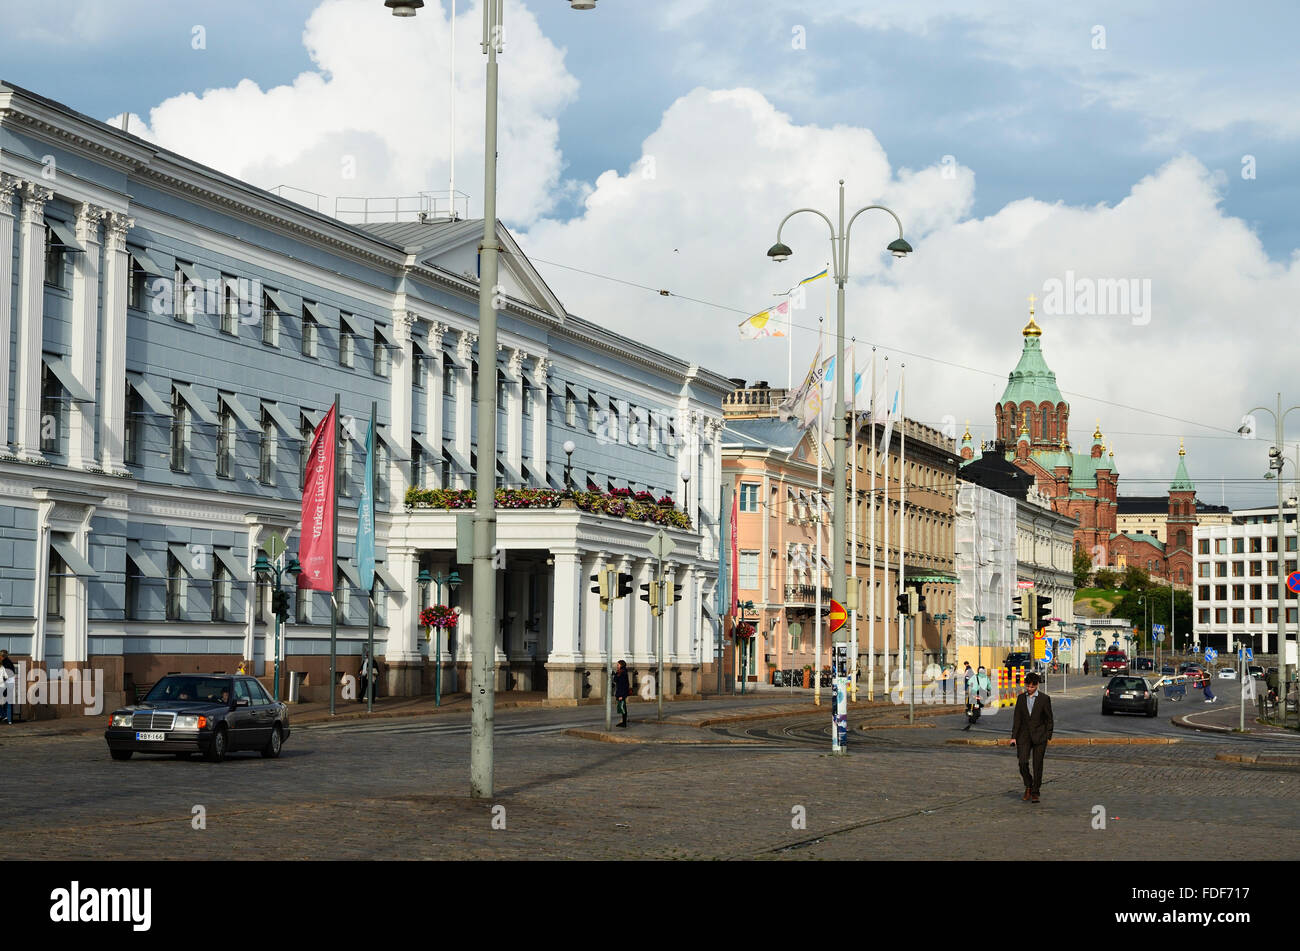 The Market Square is a central square in Helsinki, Finland Stock Photo